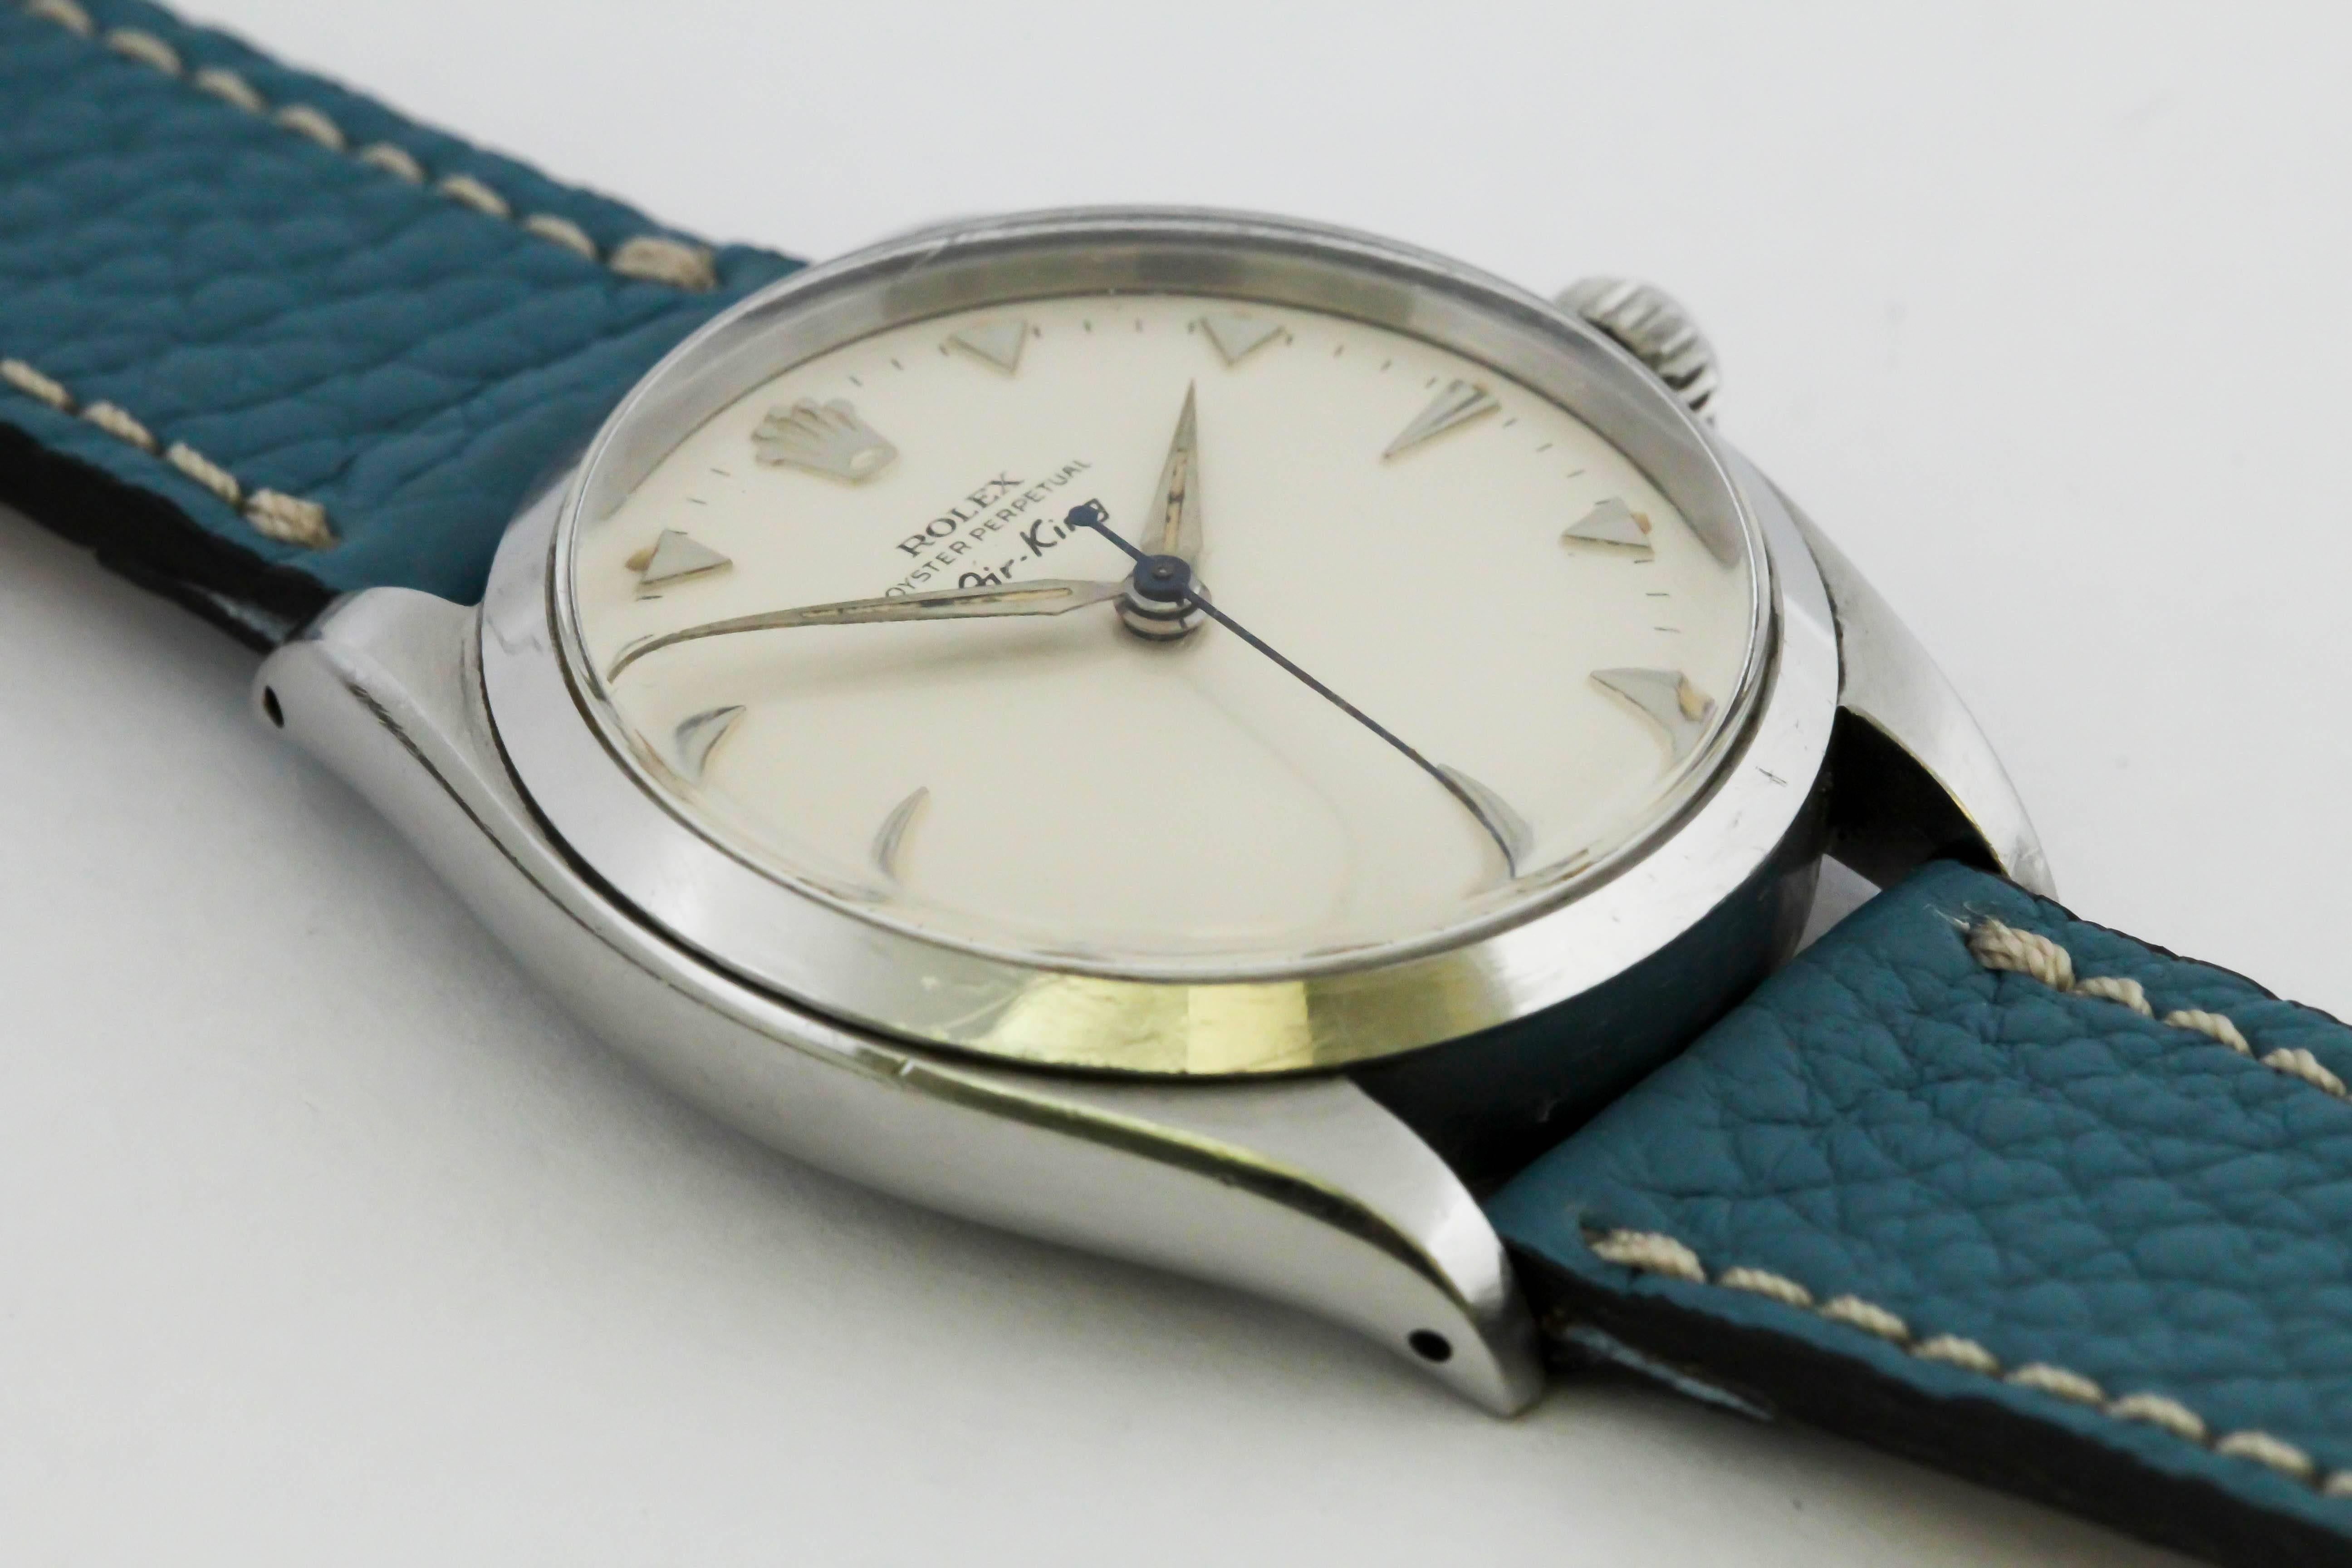 Rolex Stainless Steel Air King automatic Wristwatch Ref 5500, circa 1958 5